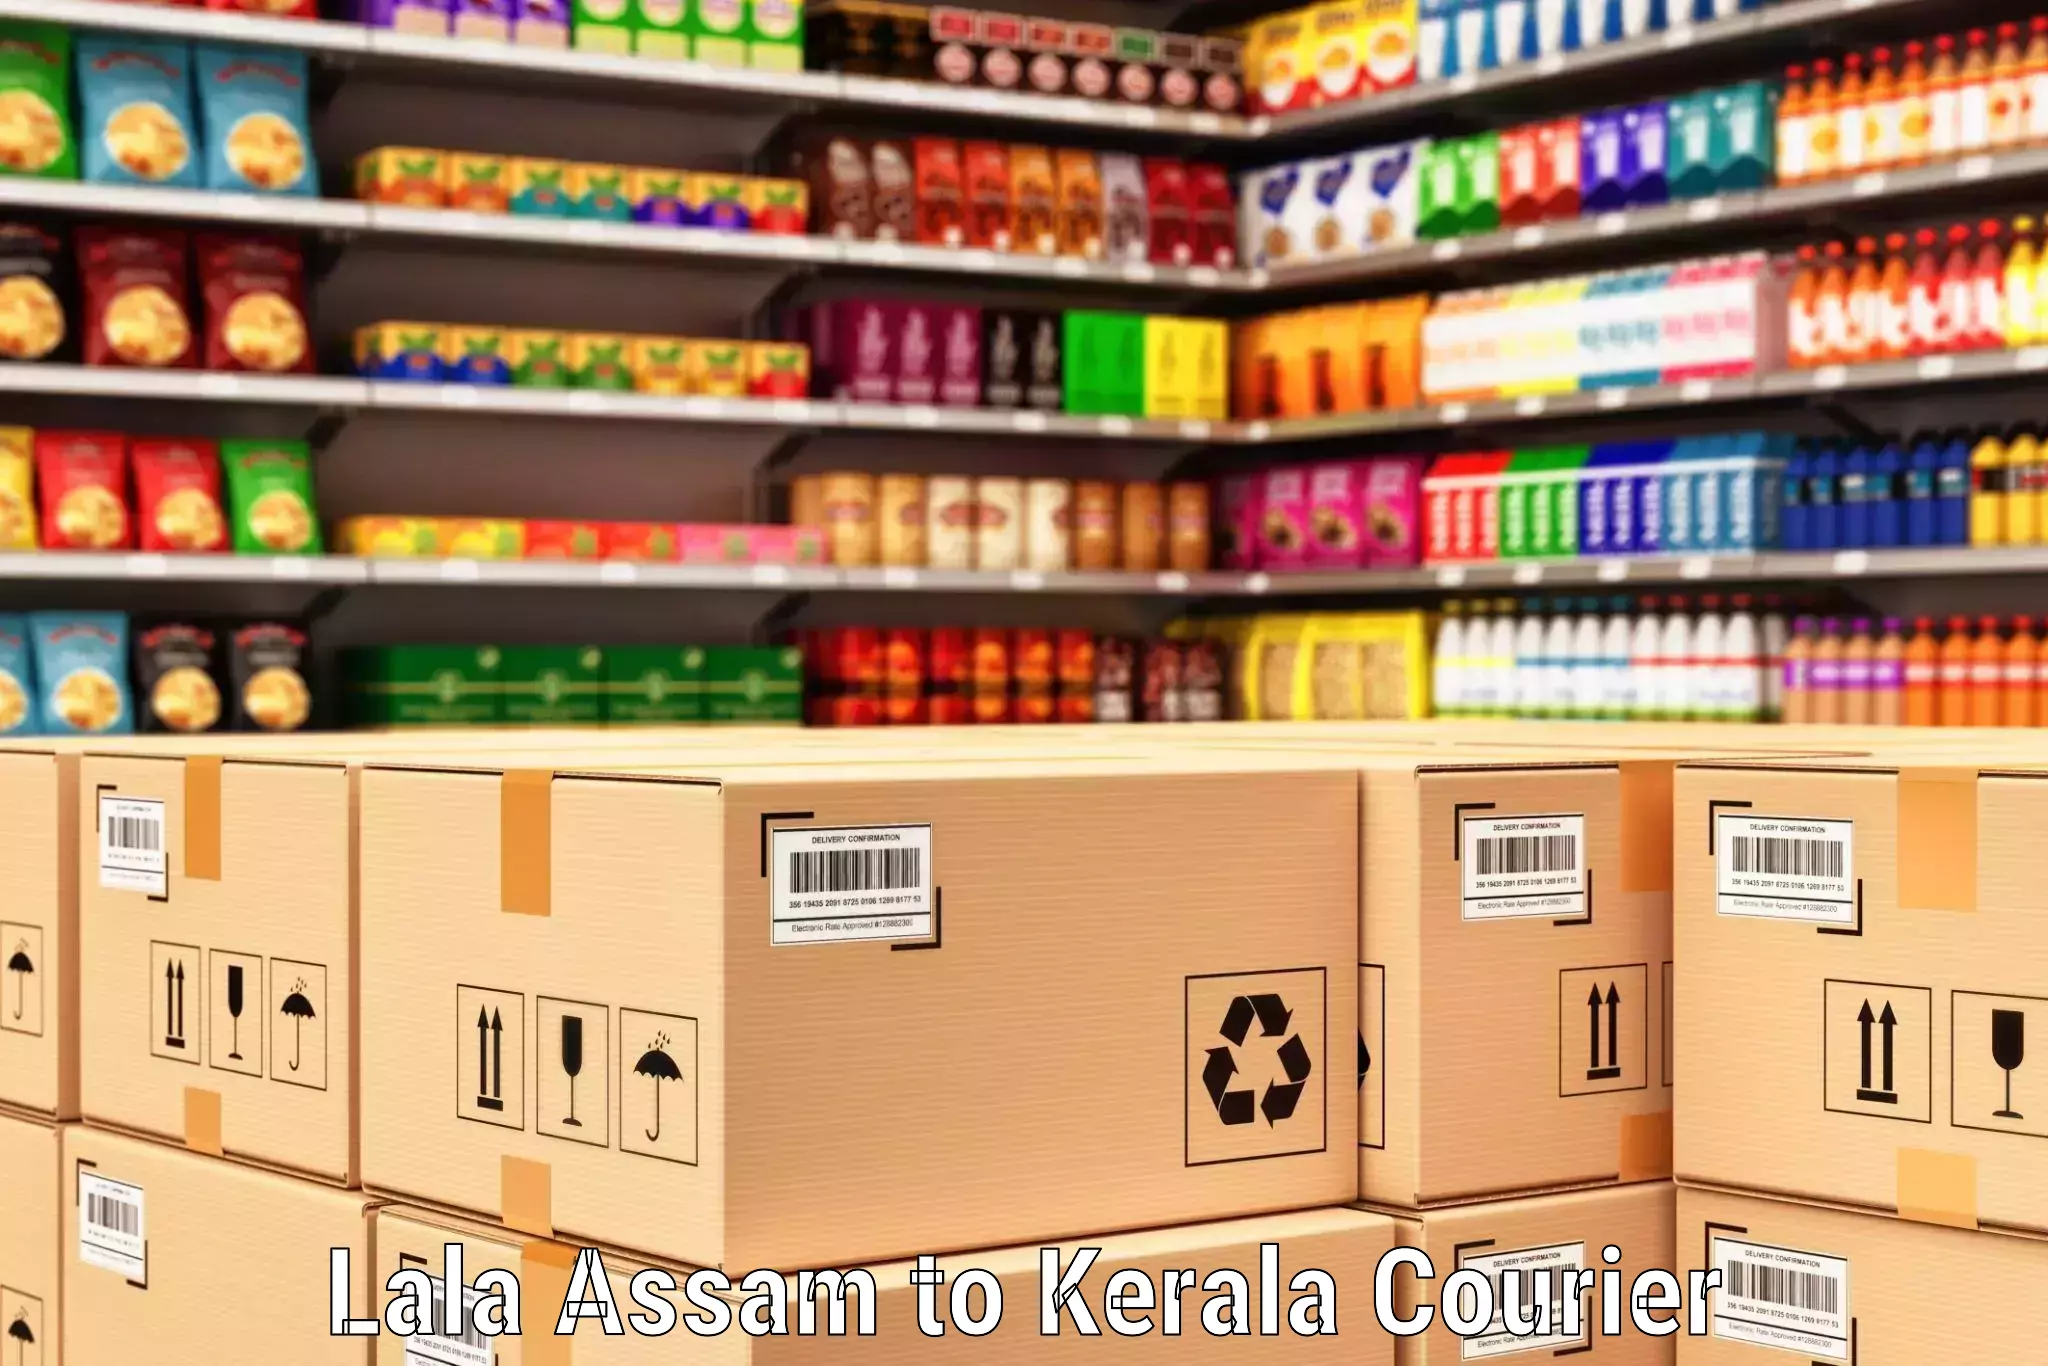 Express delivery network Lala Assam to Kerala